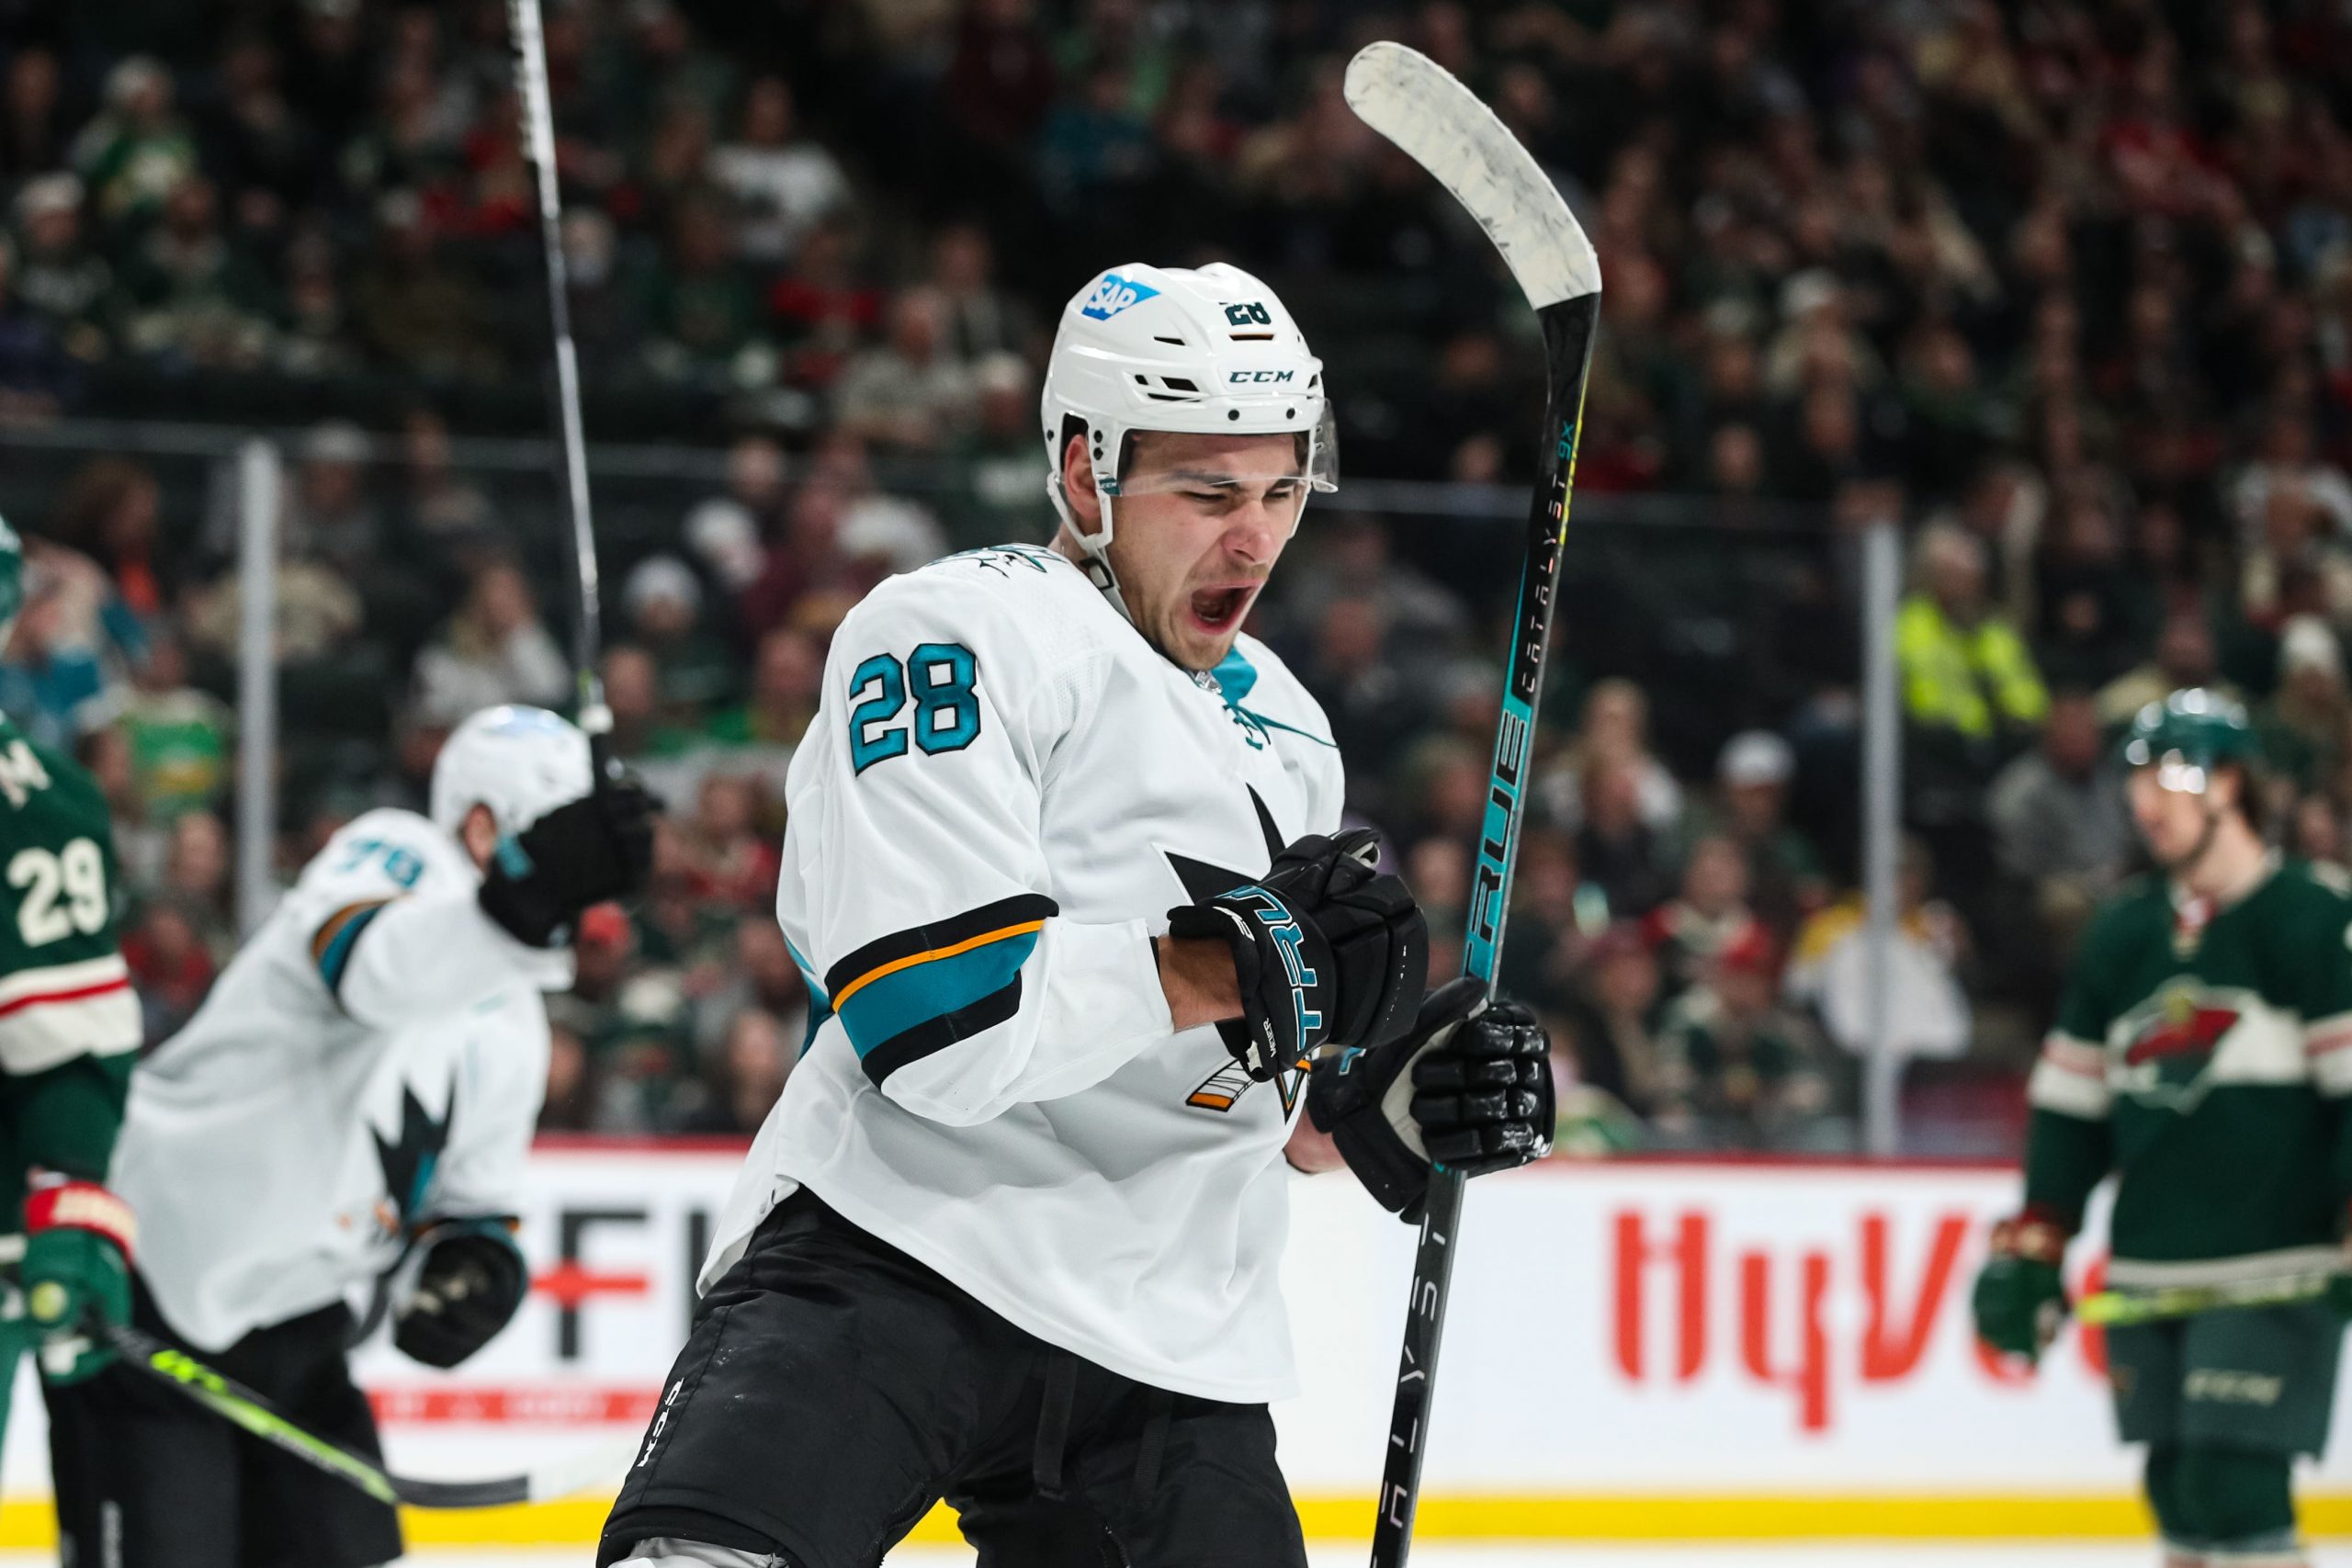 San Jose Sharks right wing Timo Meier (28) celebrates after scoring a goal against the Minnesota Wild in the first period at Xcel Energy Center. Mandatory Credit: David Berding-USA TODAY Sports